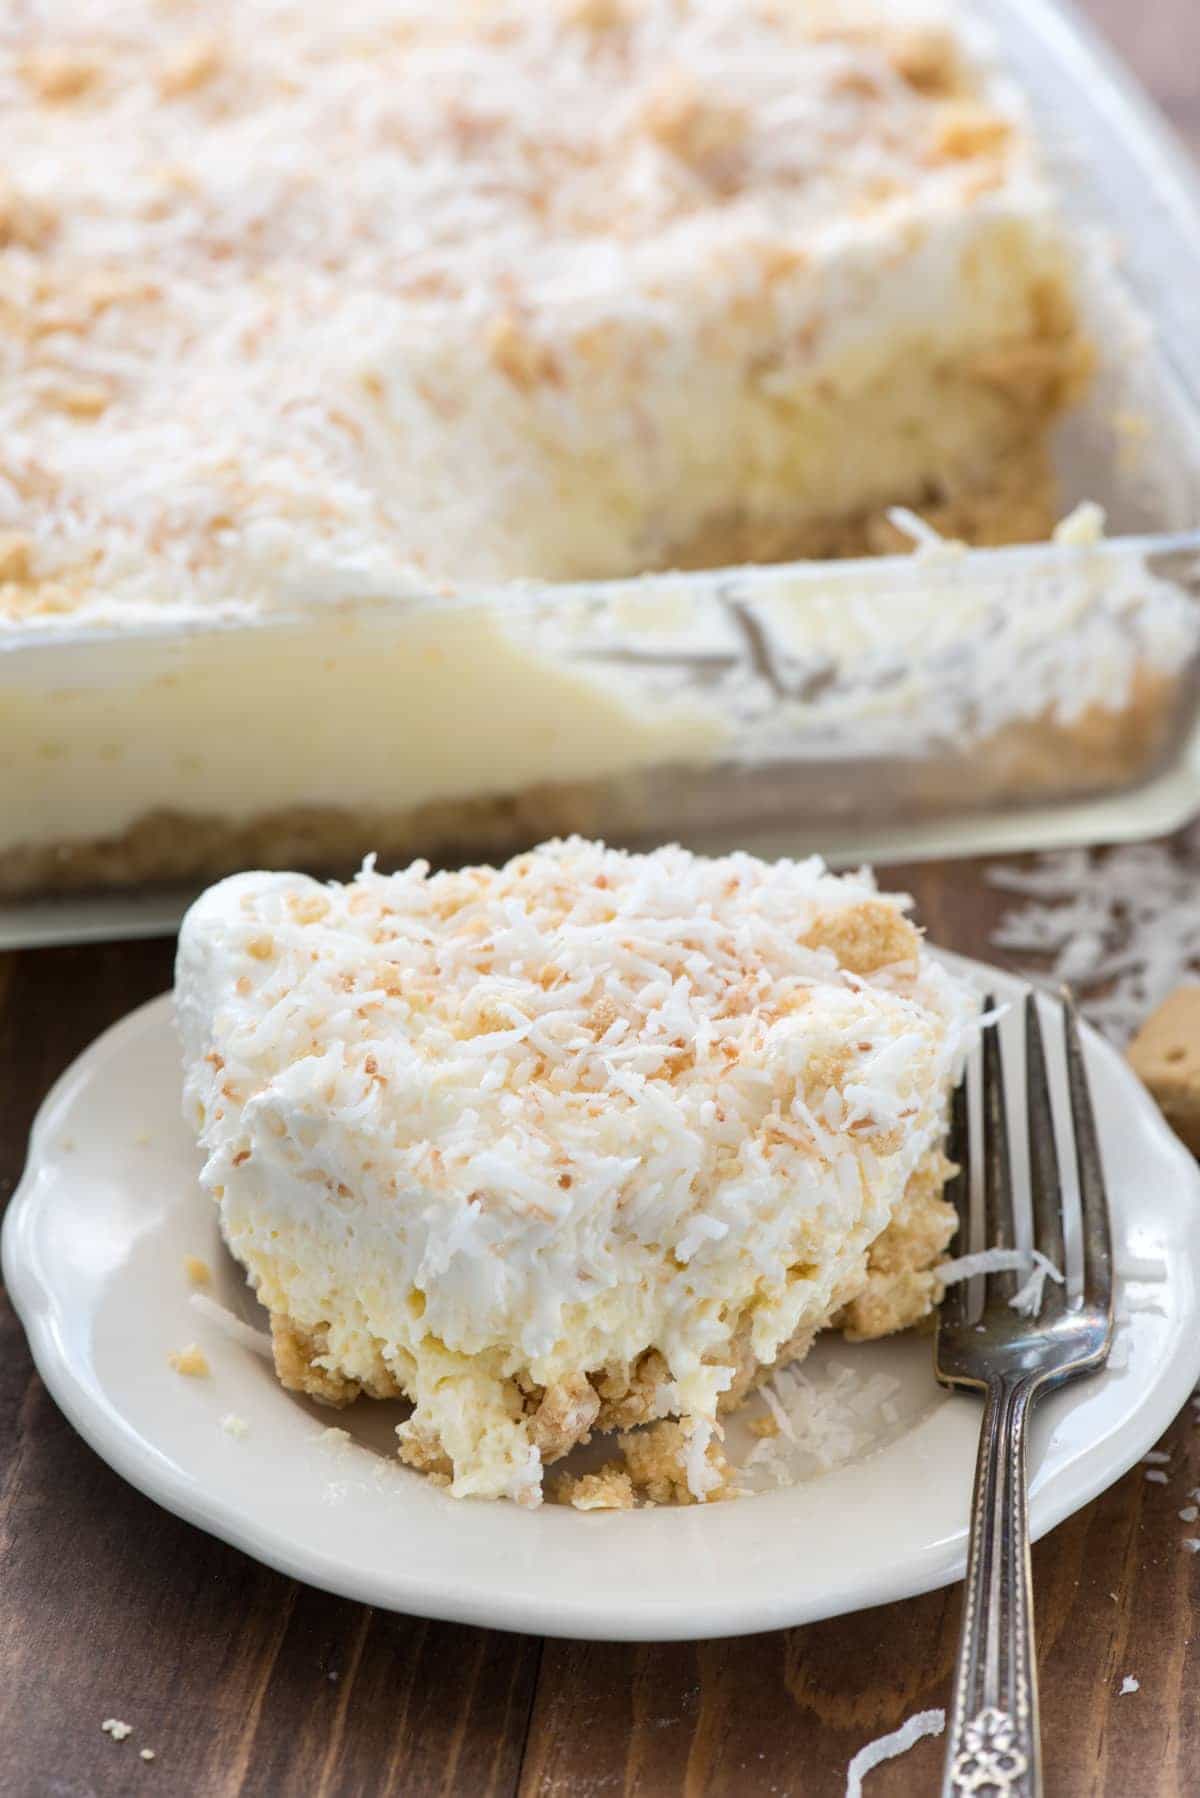 Coconut Cheesecake No Bake Dessert - an easy no bake recipe! This Coconut Delight is filled with cheesecake flavor and a shortbread crust.